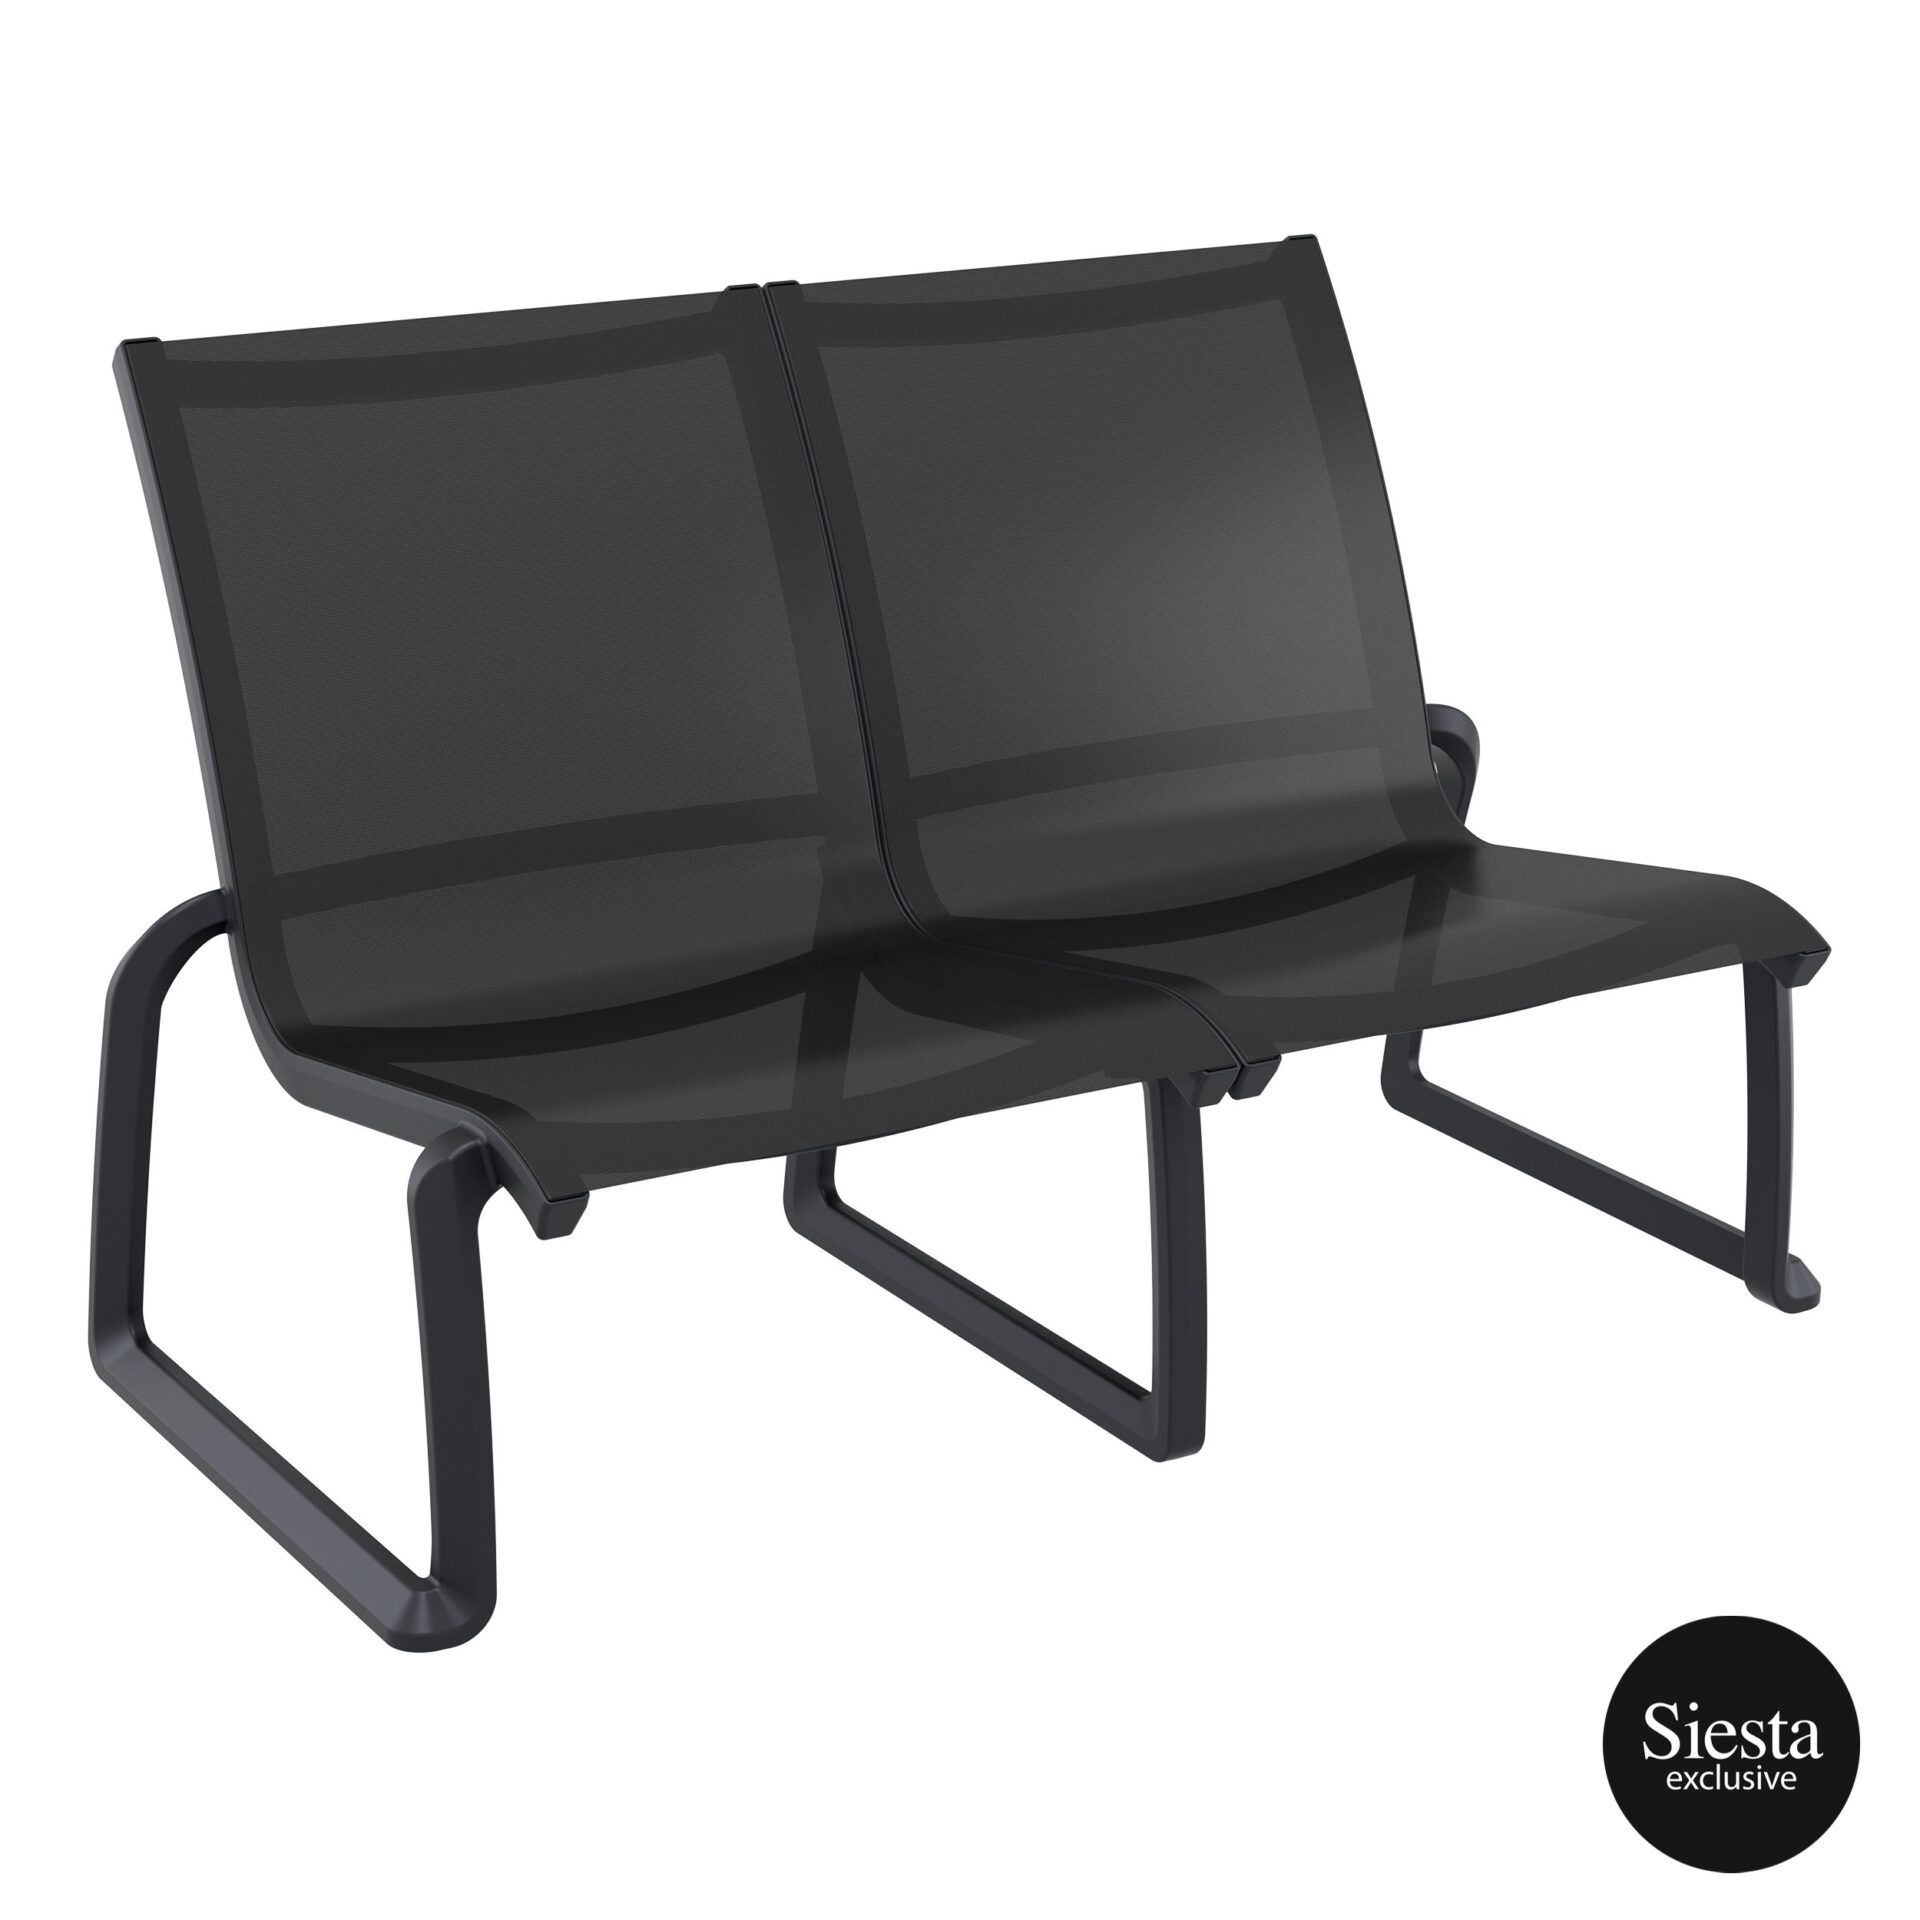 004 pacific lounge sofa chair black black front side